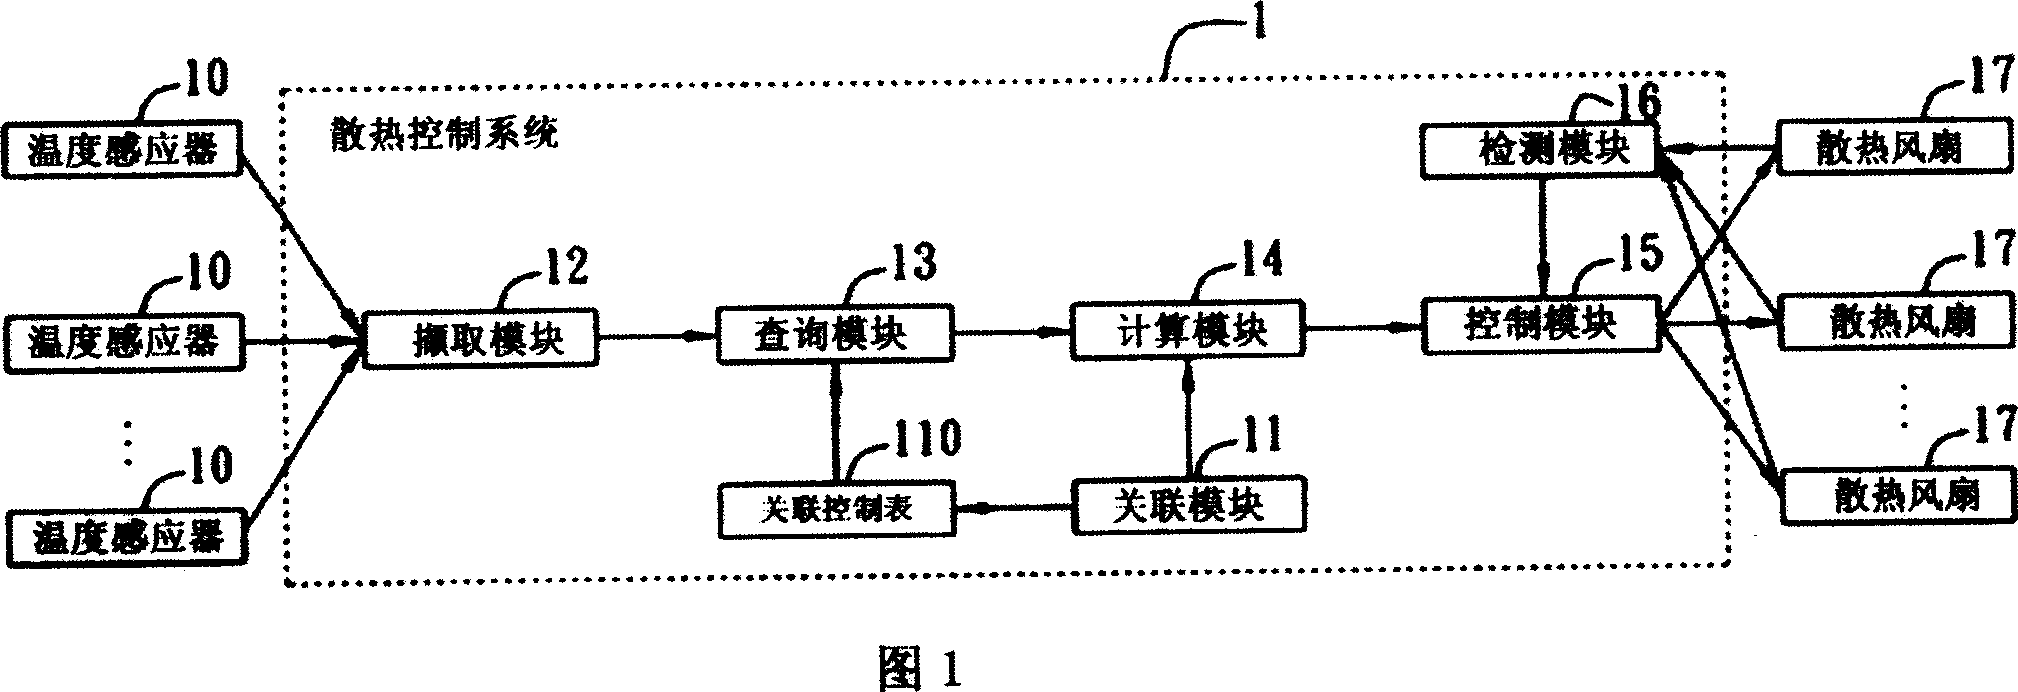 Heat sinking control system and method